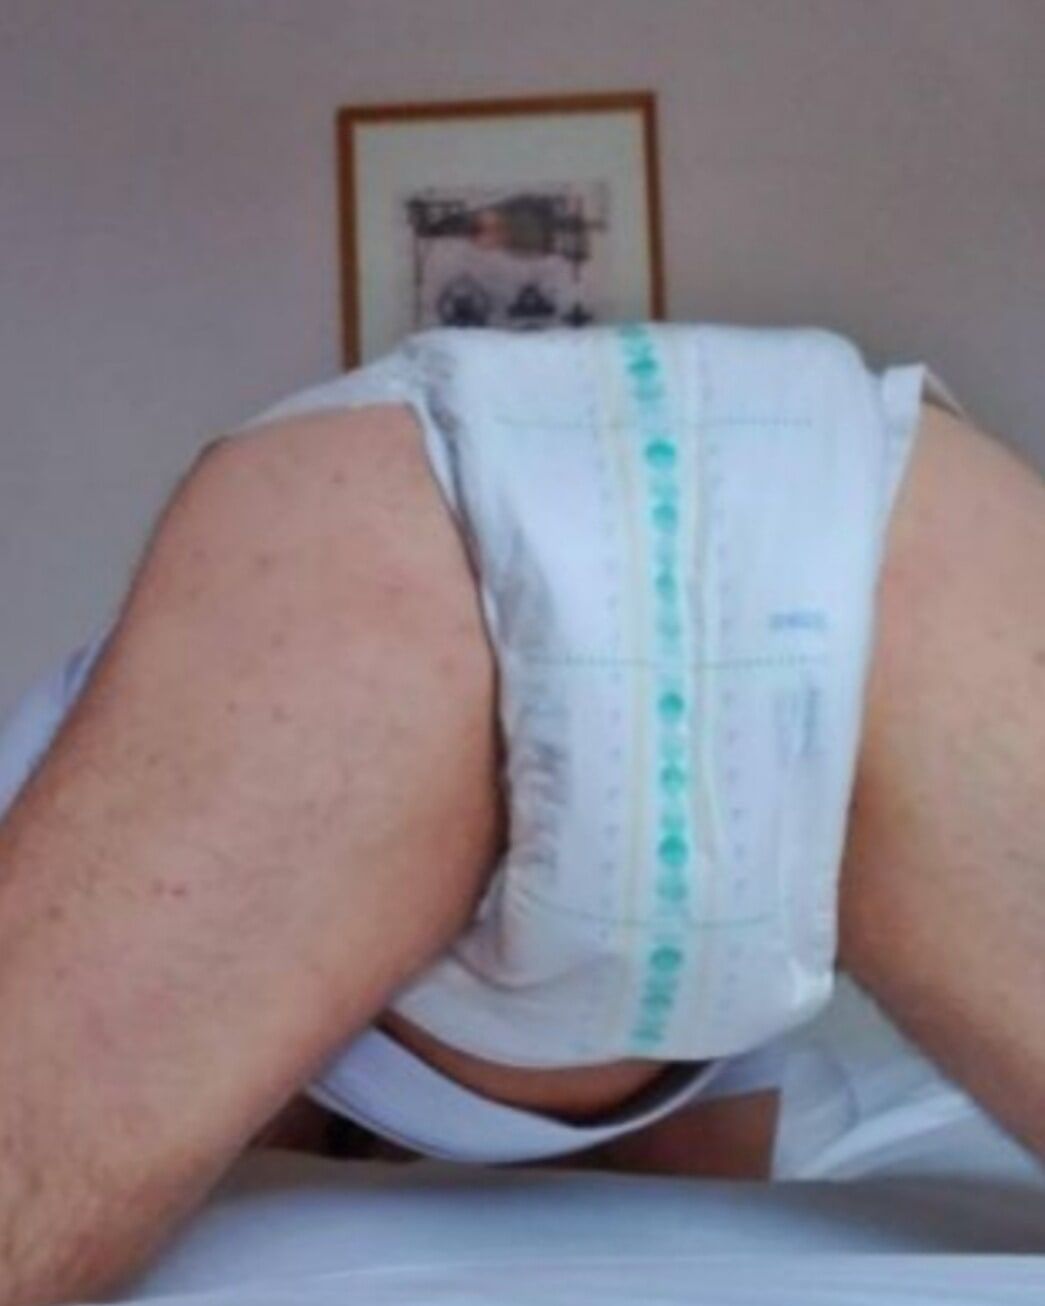 I'm incontinent but I use diaper for pleasure too #7